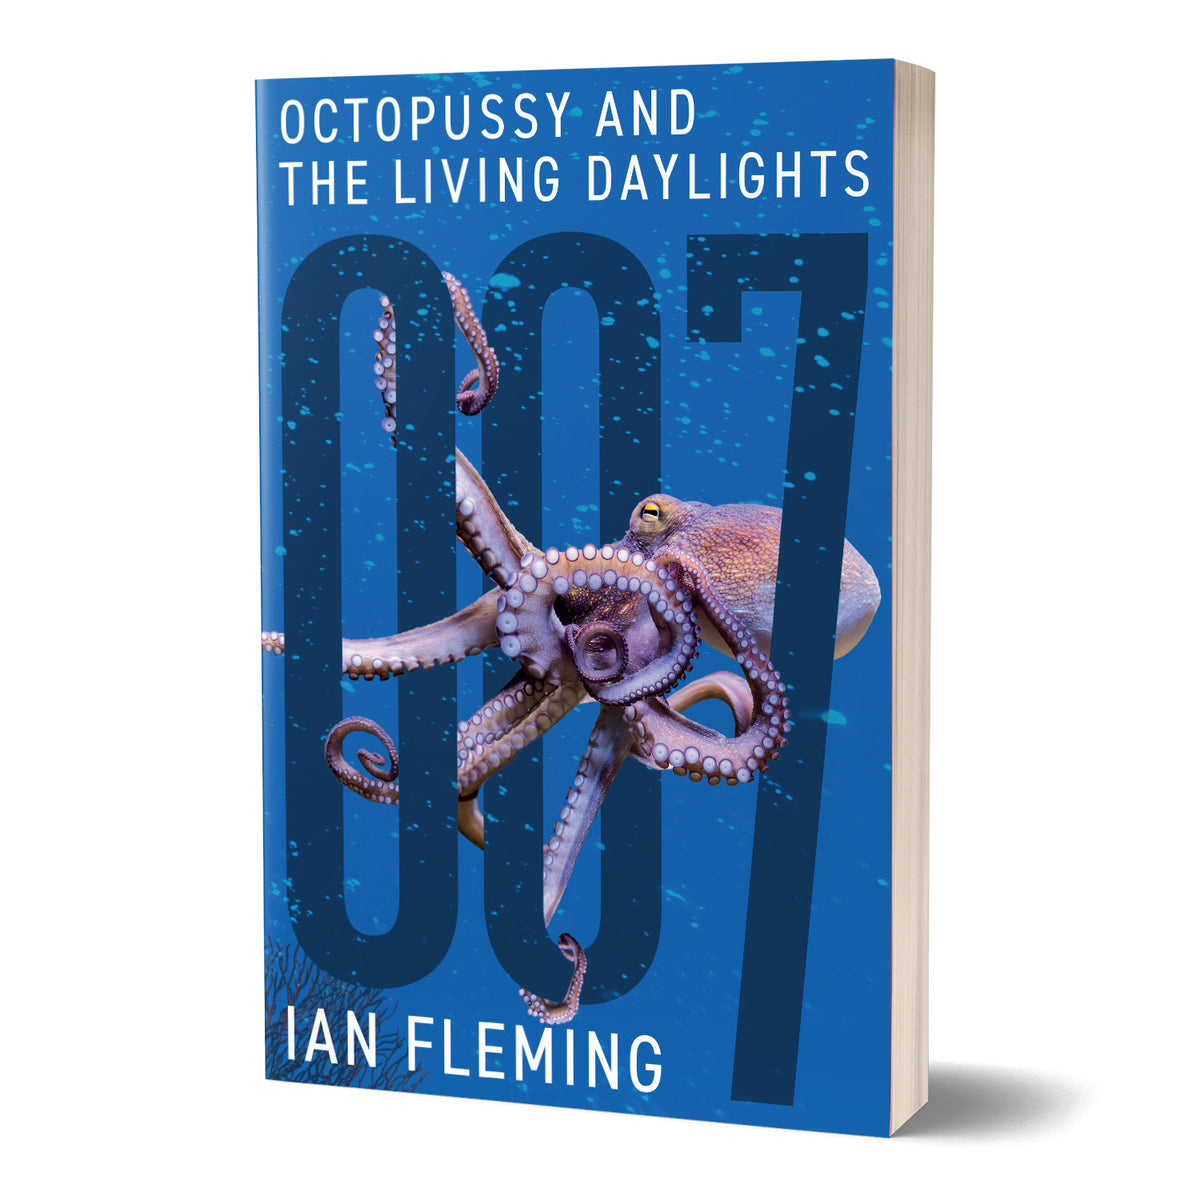 James Bond Octopussy and The Living Daylights Book - By Ian Fleming